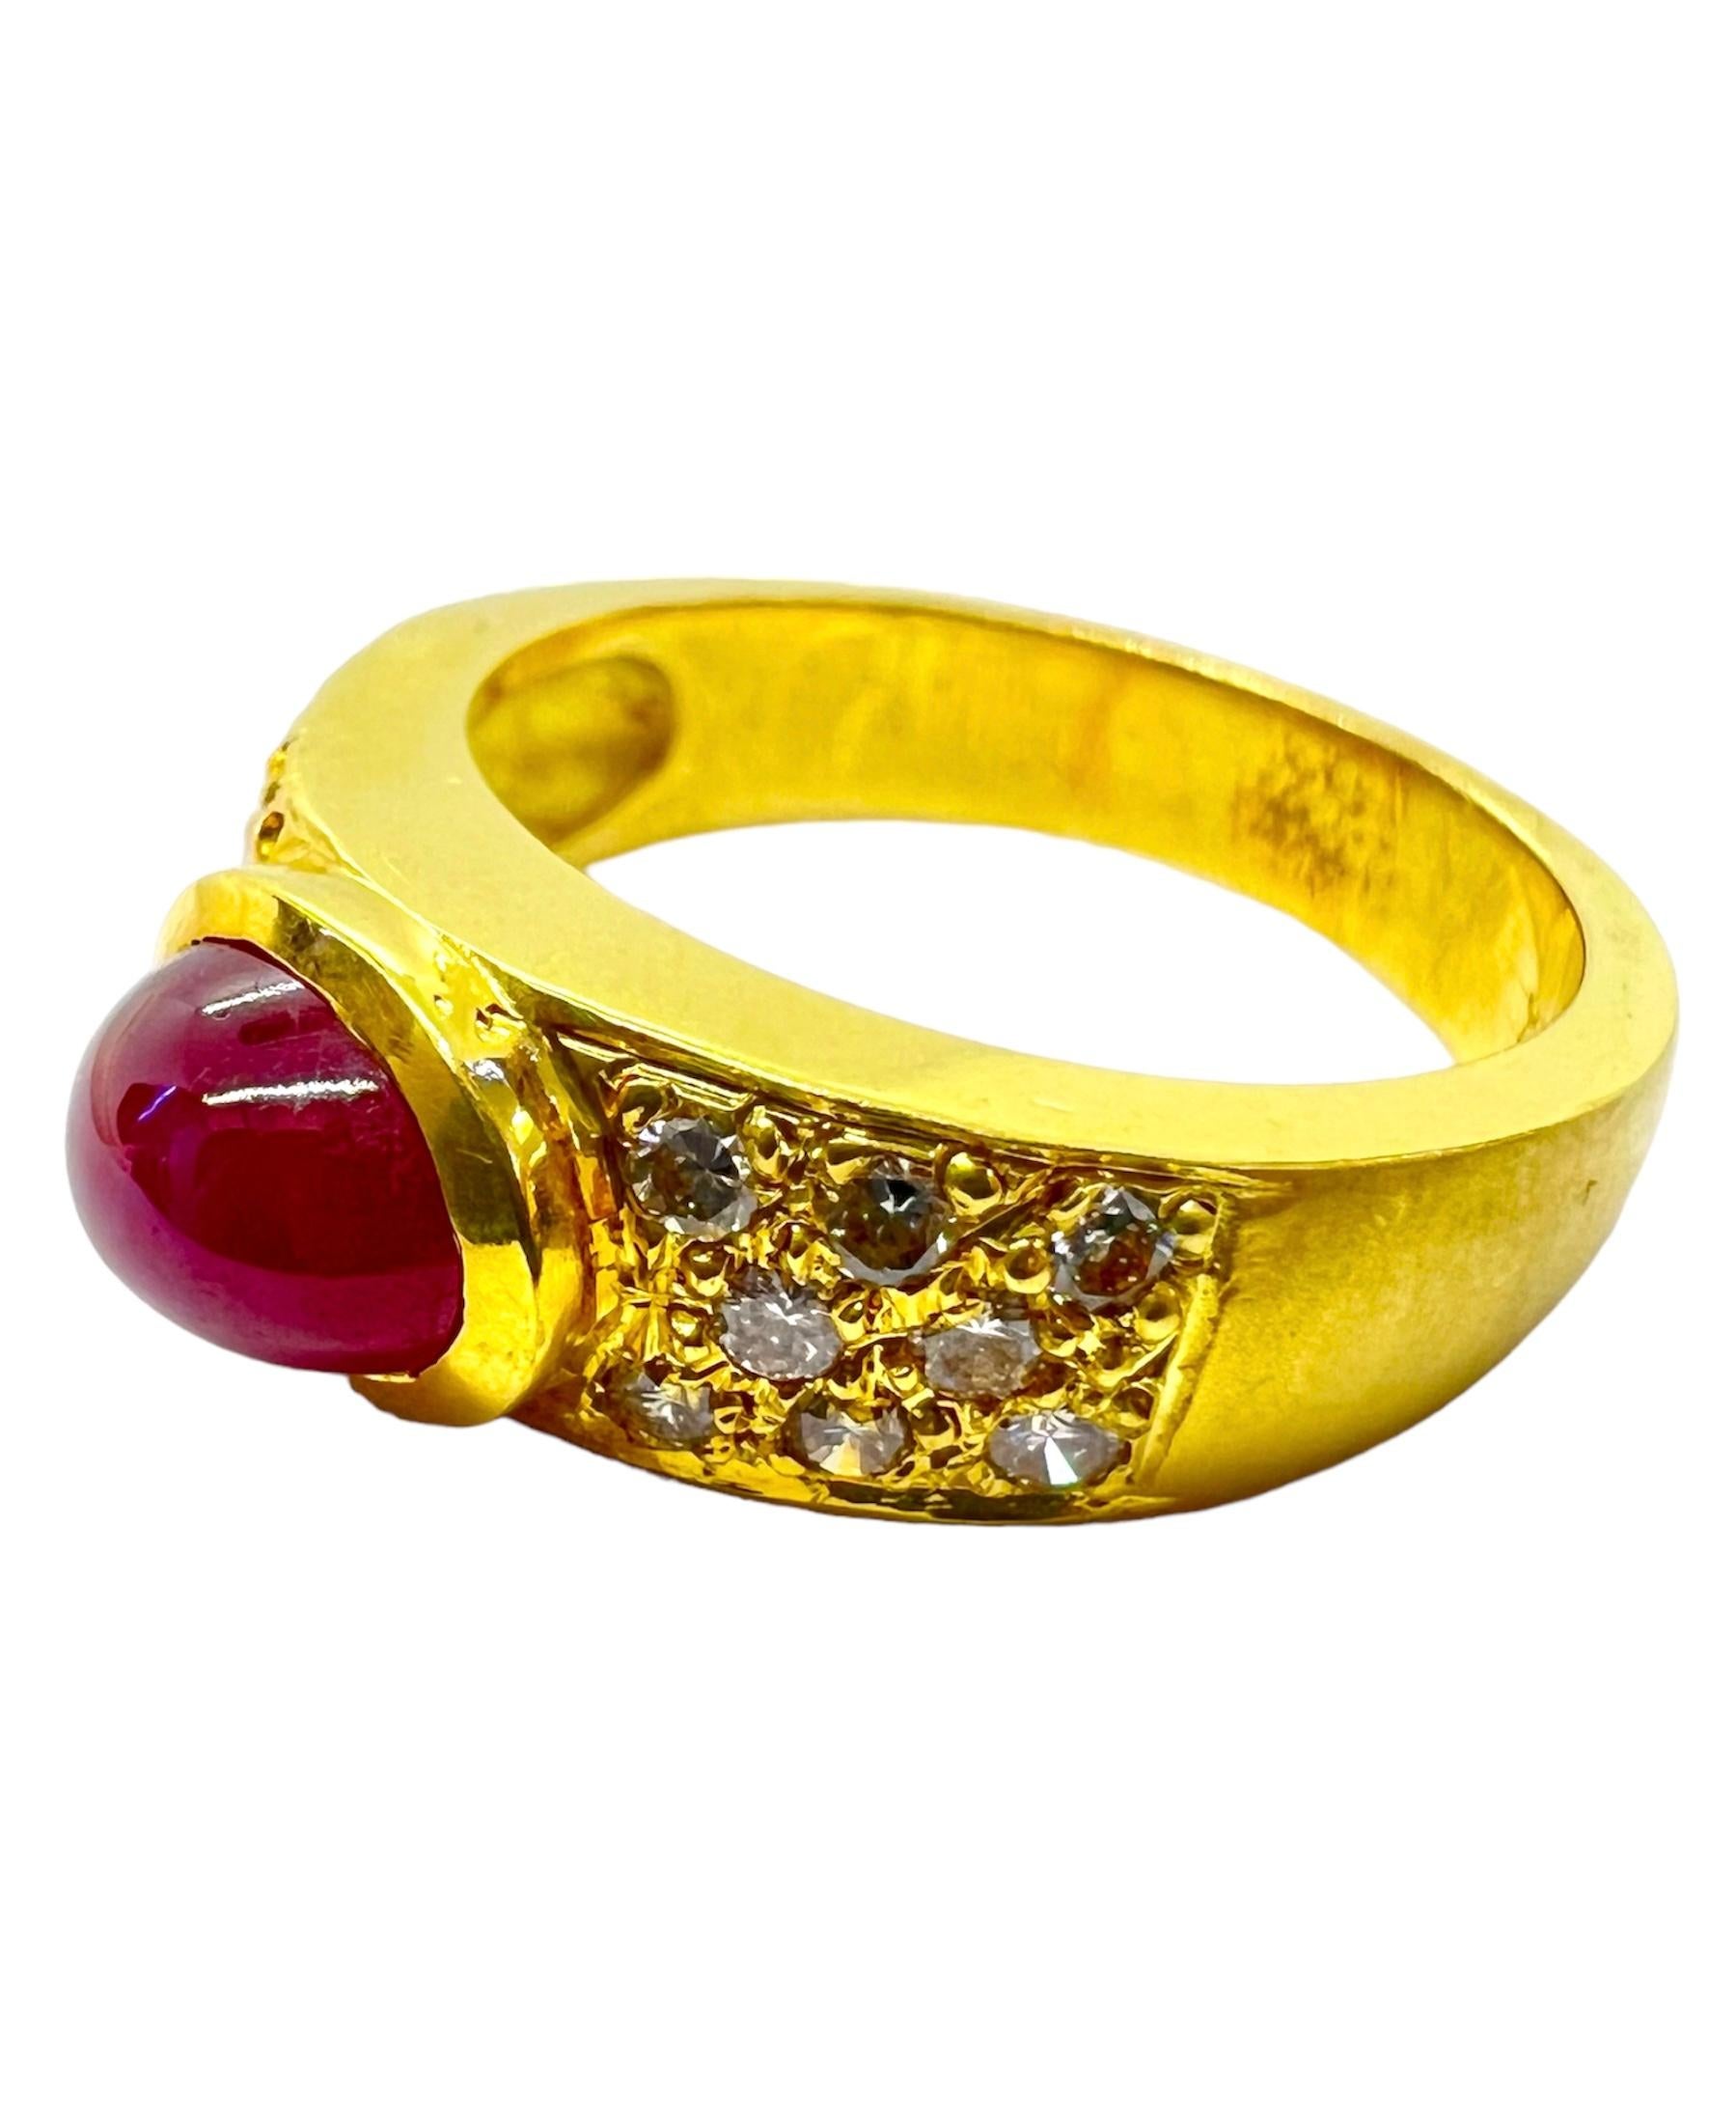 18K yellow gold ring with ruby and diamonds.

Sophia D by Joseph Dardashti LTD has been known worldwide for 35 years and are inspired by classic Art Deco design that merges with modern manufacturing techniques.